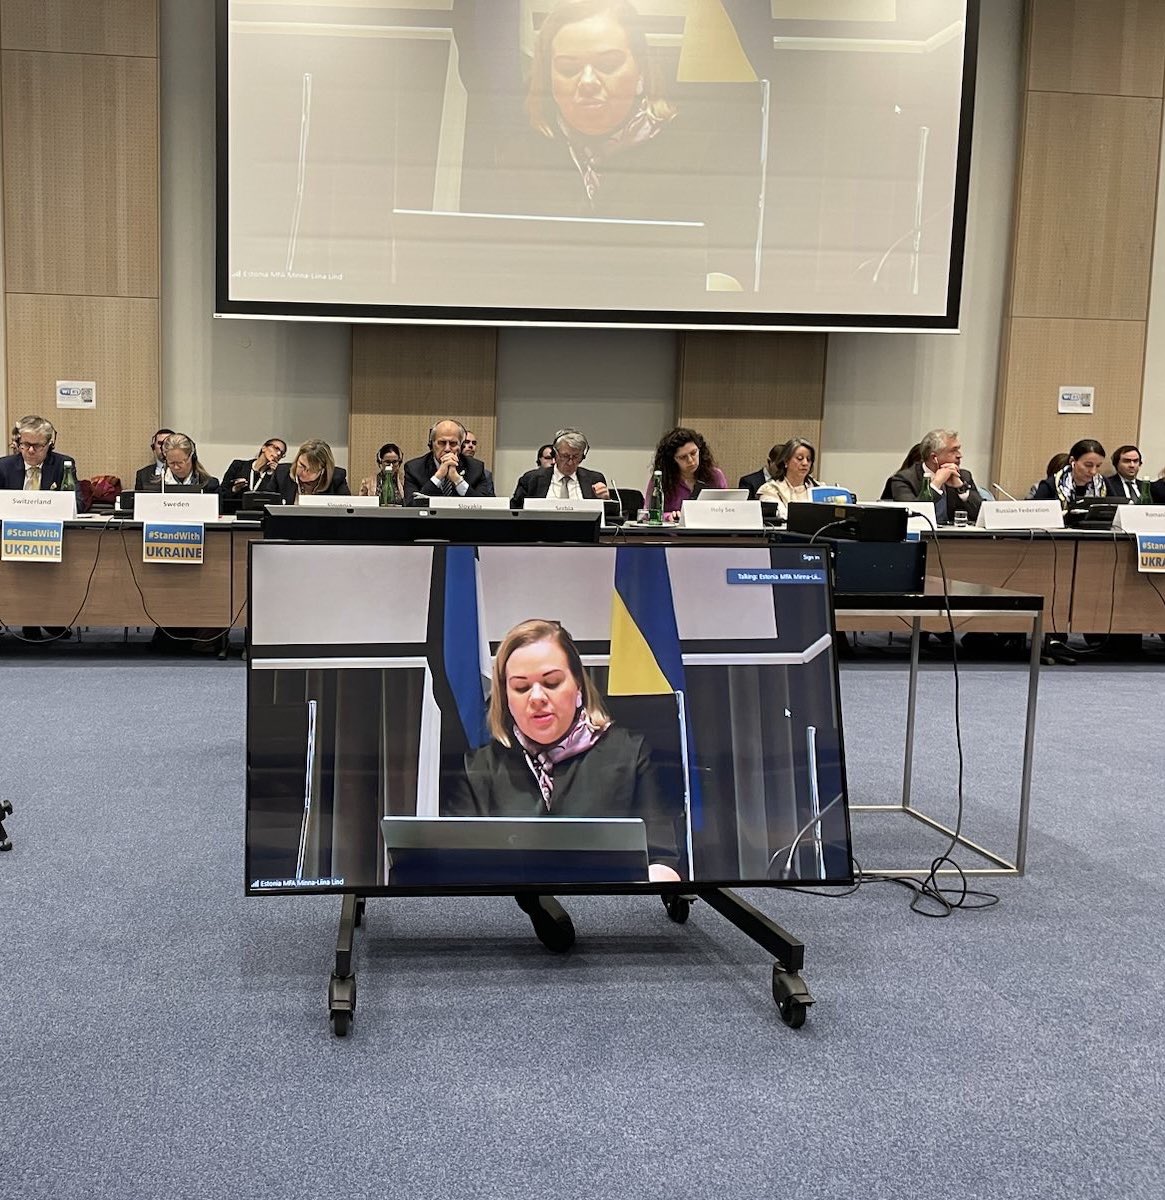 🇪🇪statement at reinforced PC by @MinnaLiinaLind: “2️⃣ years of full-scale 🇷🇺’s war of aggression against 🇺🇦 have been eternity for Ukrainians.” Kidnapping and orphaning of 🇺🇦 children is one of the most horrific crimes committed by RU regime. #StandwithUkraine